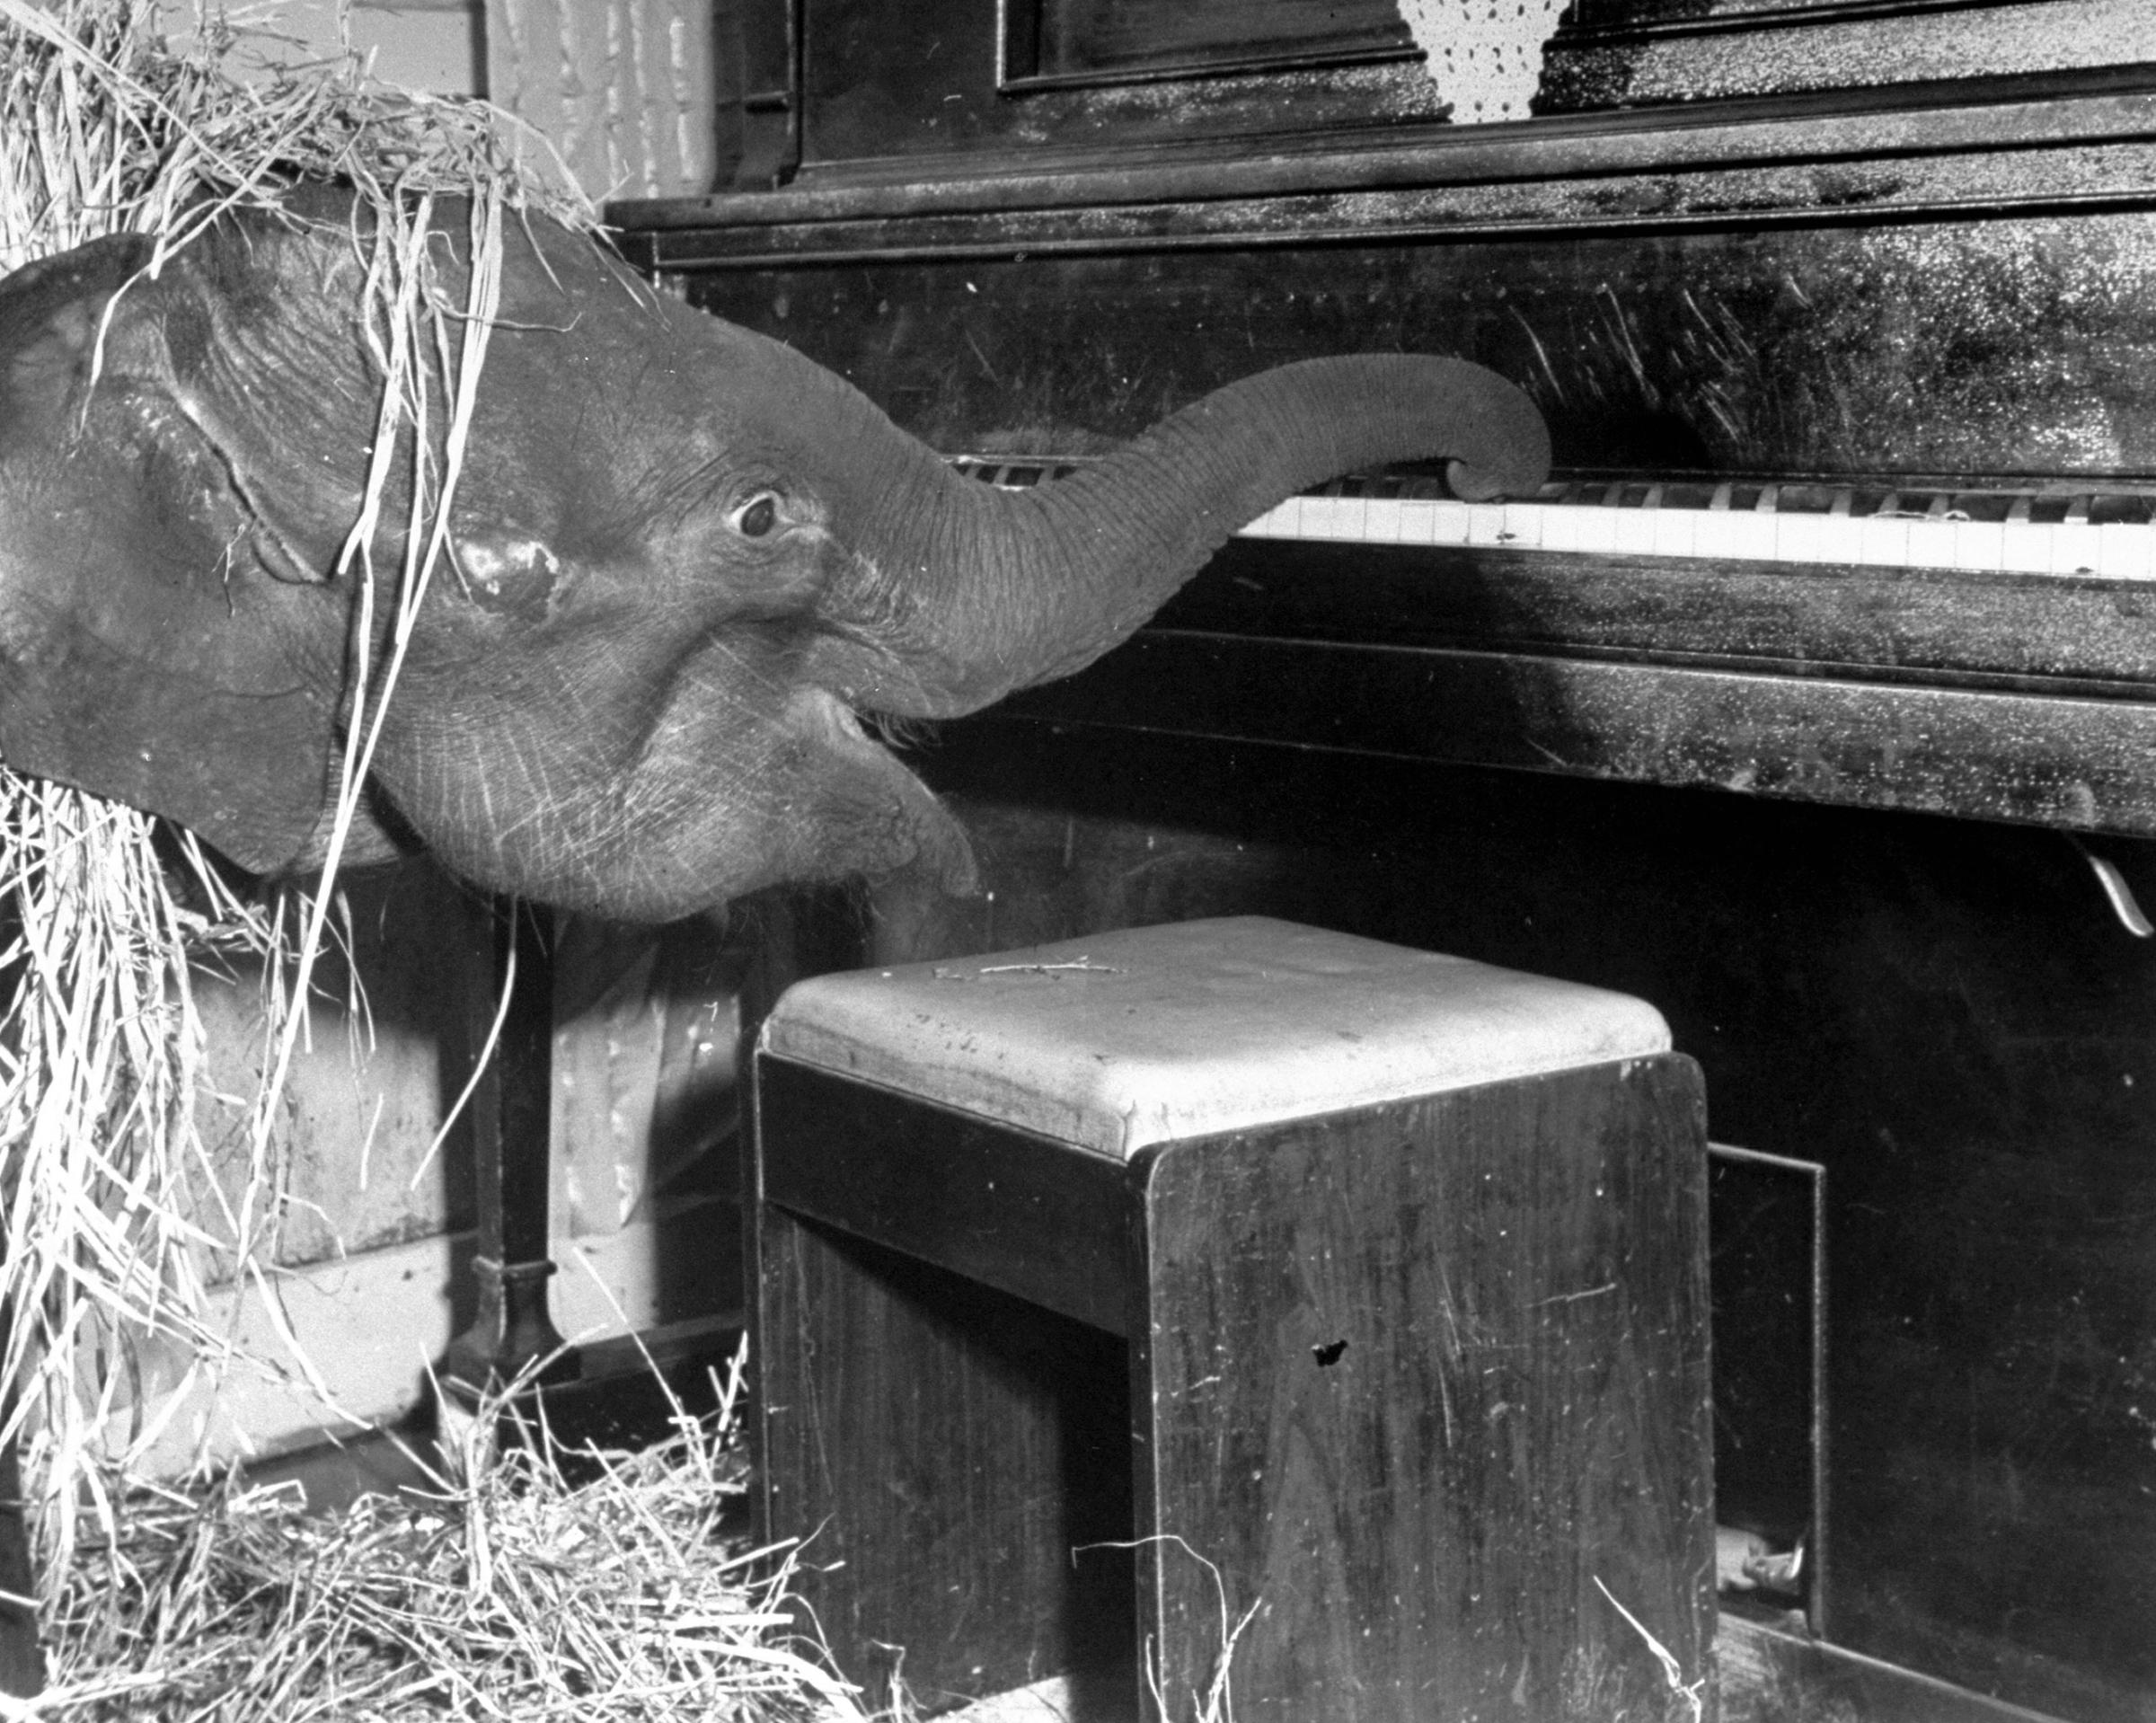 "Butch", baby female Indian elephant in the Dailey Circus, playing piano.